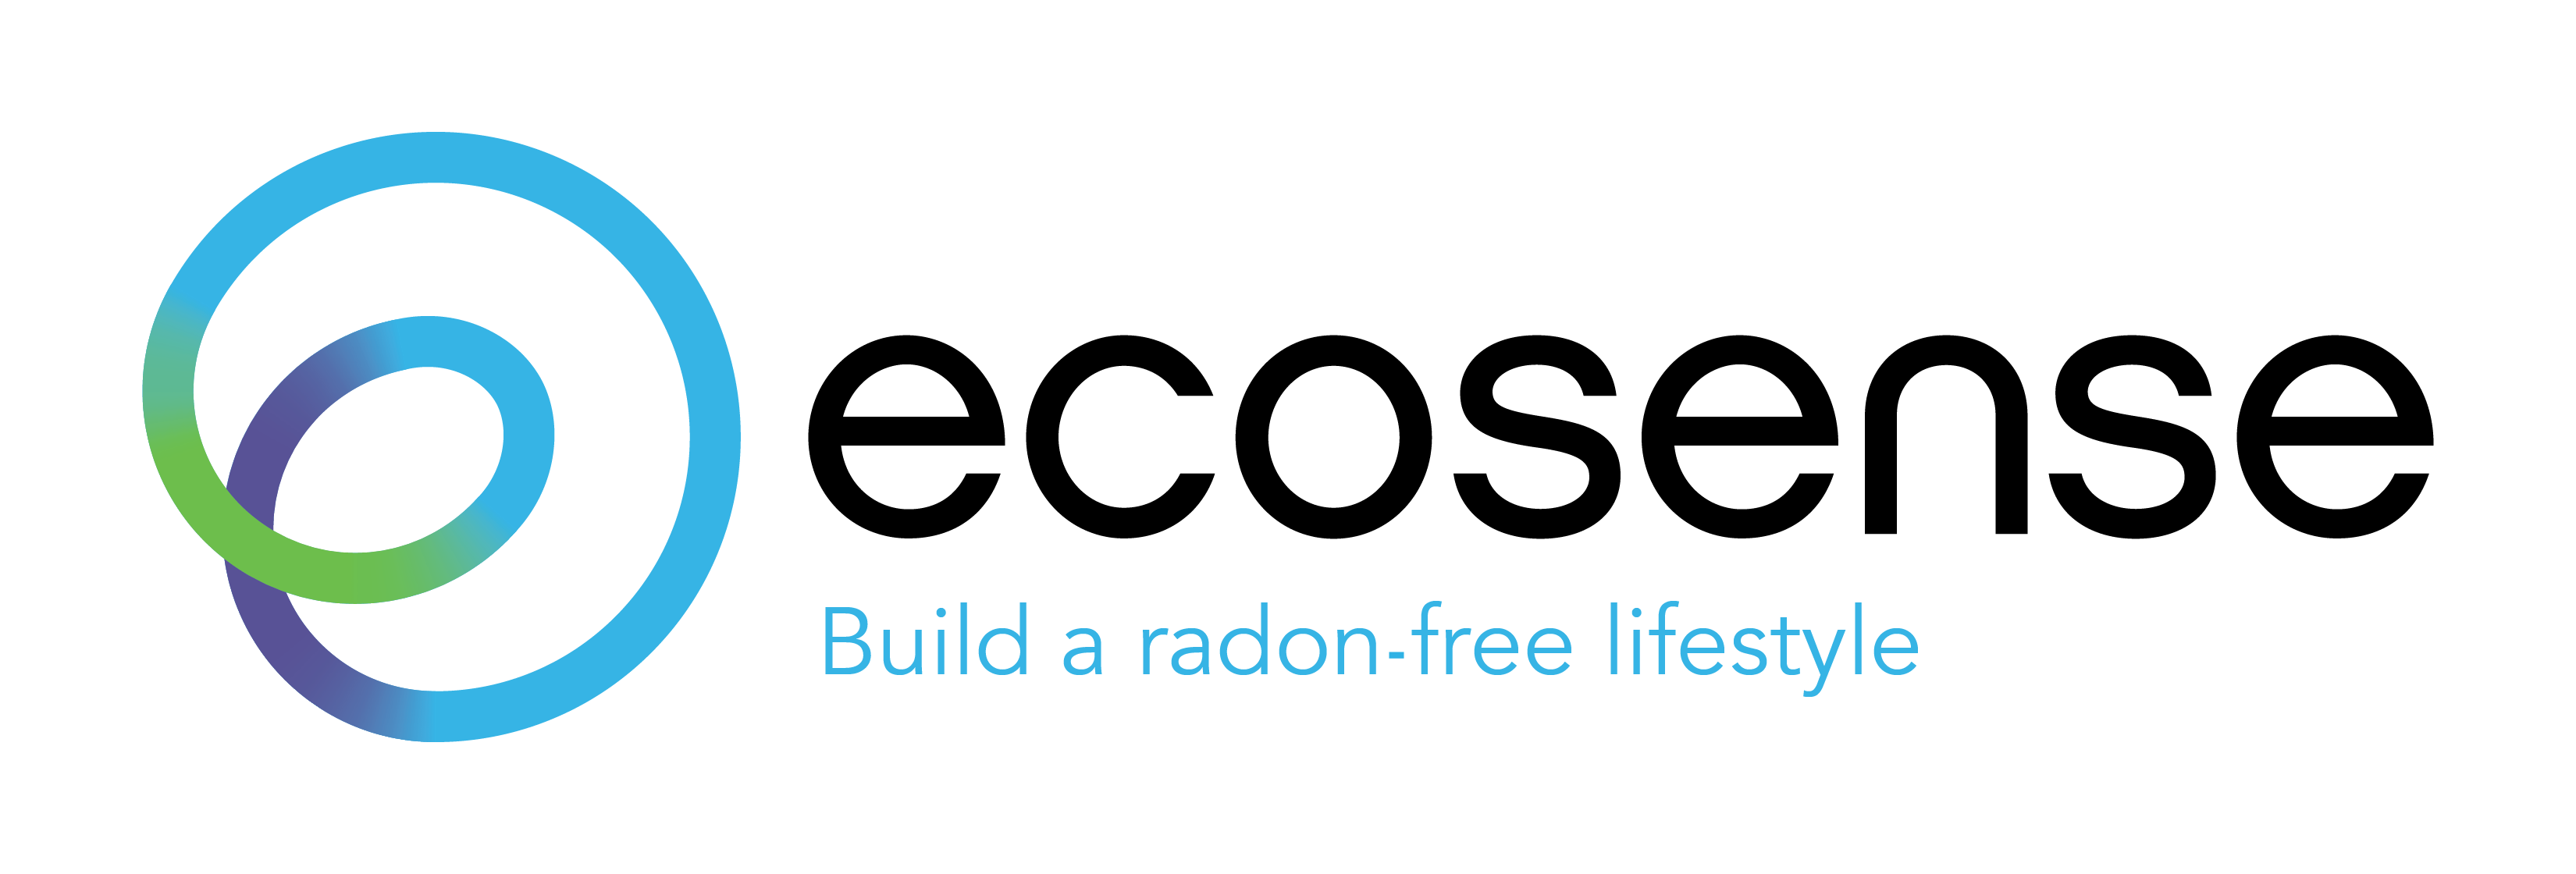 Ecosense Applauds FHFA Enhanced Radon Testing Requirements Announced for Multifamily Properties